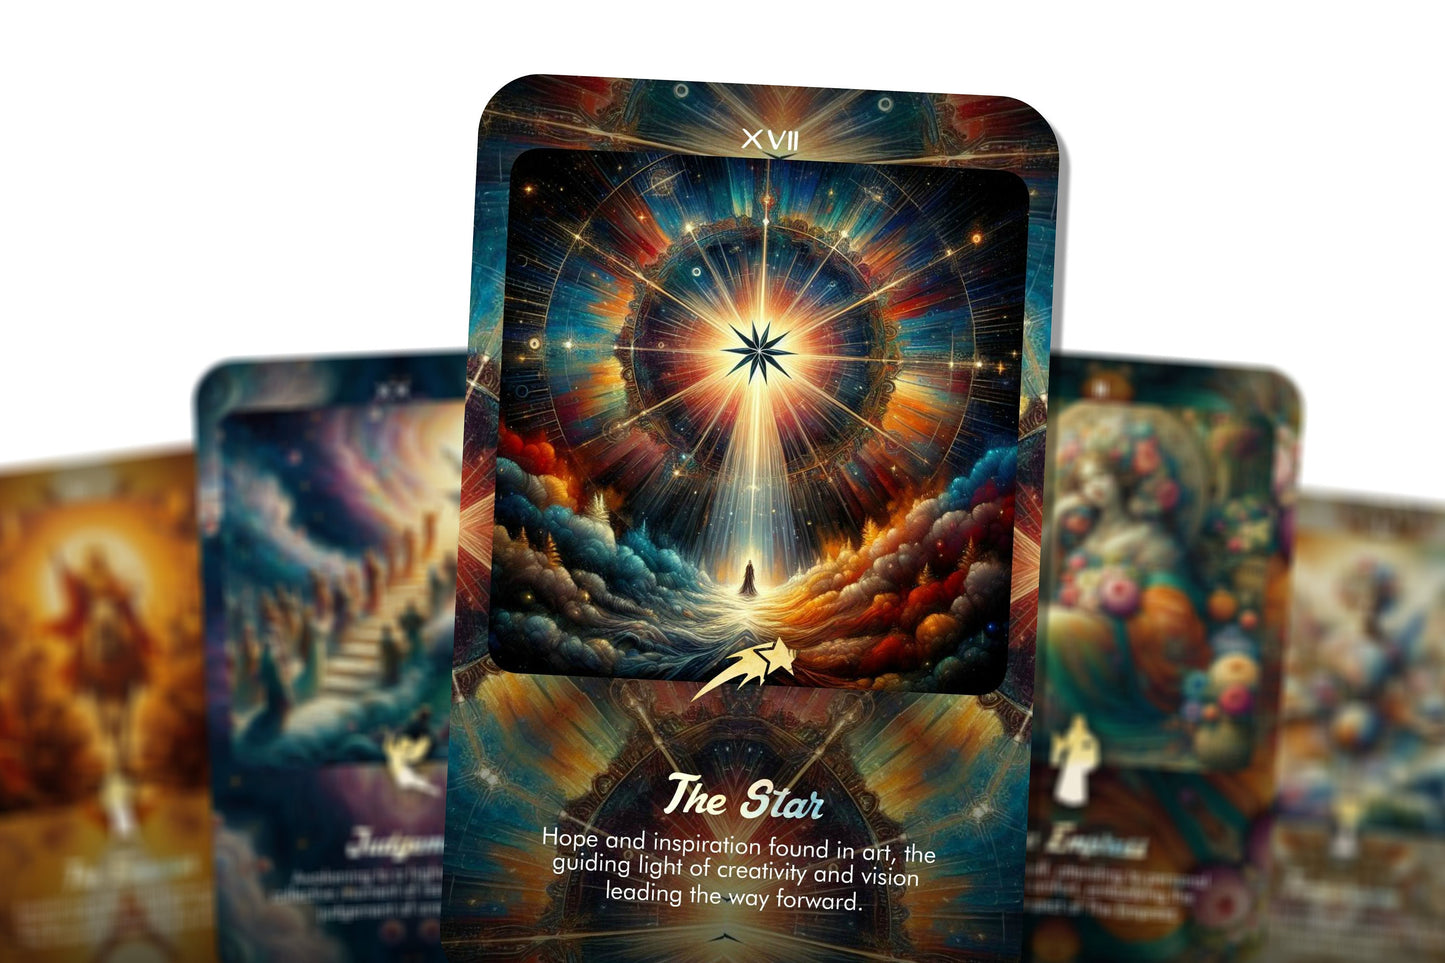 A Day in the Life - A Tarot Journey - Major Arcana - Every day is a step on the path of the soul's journey